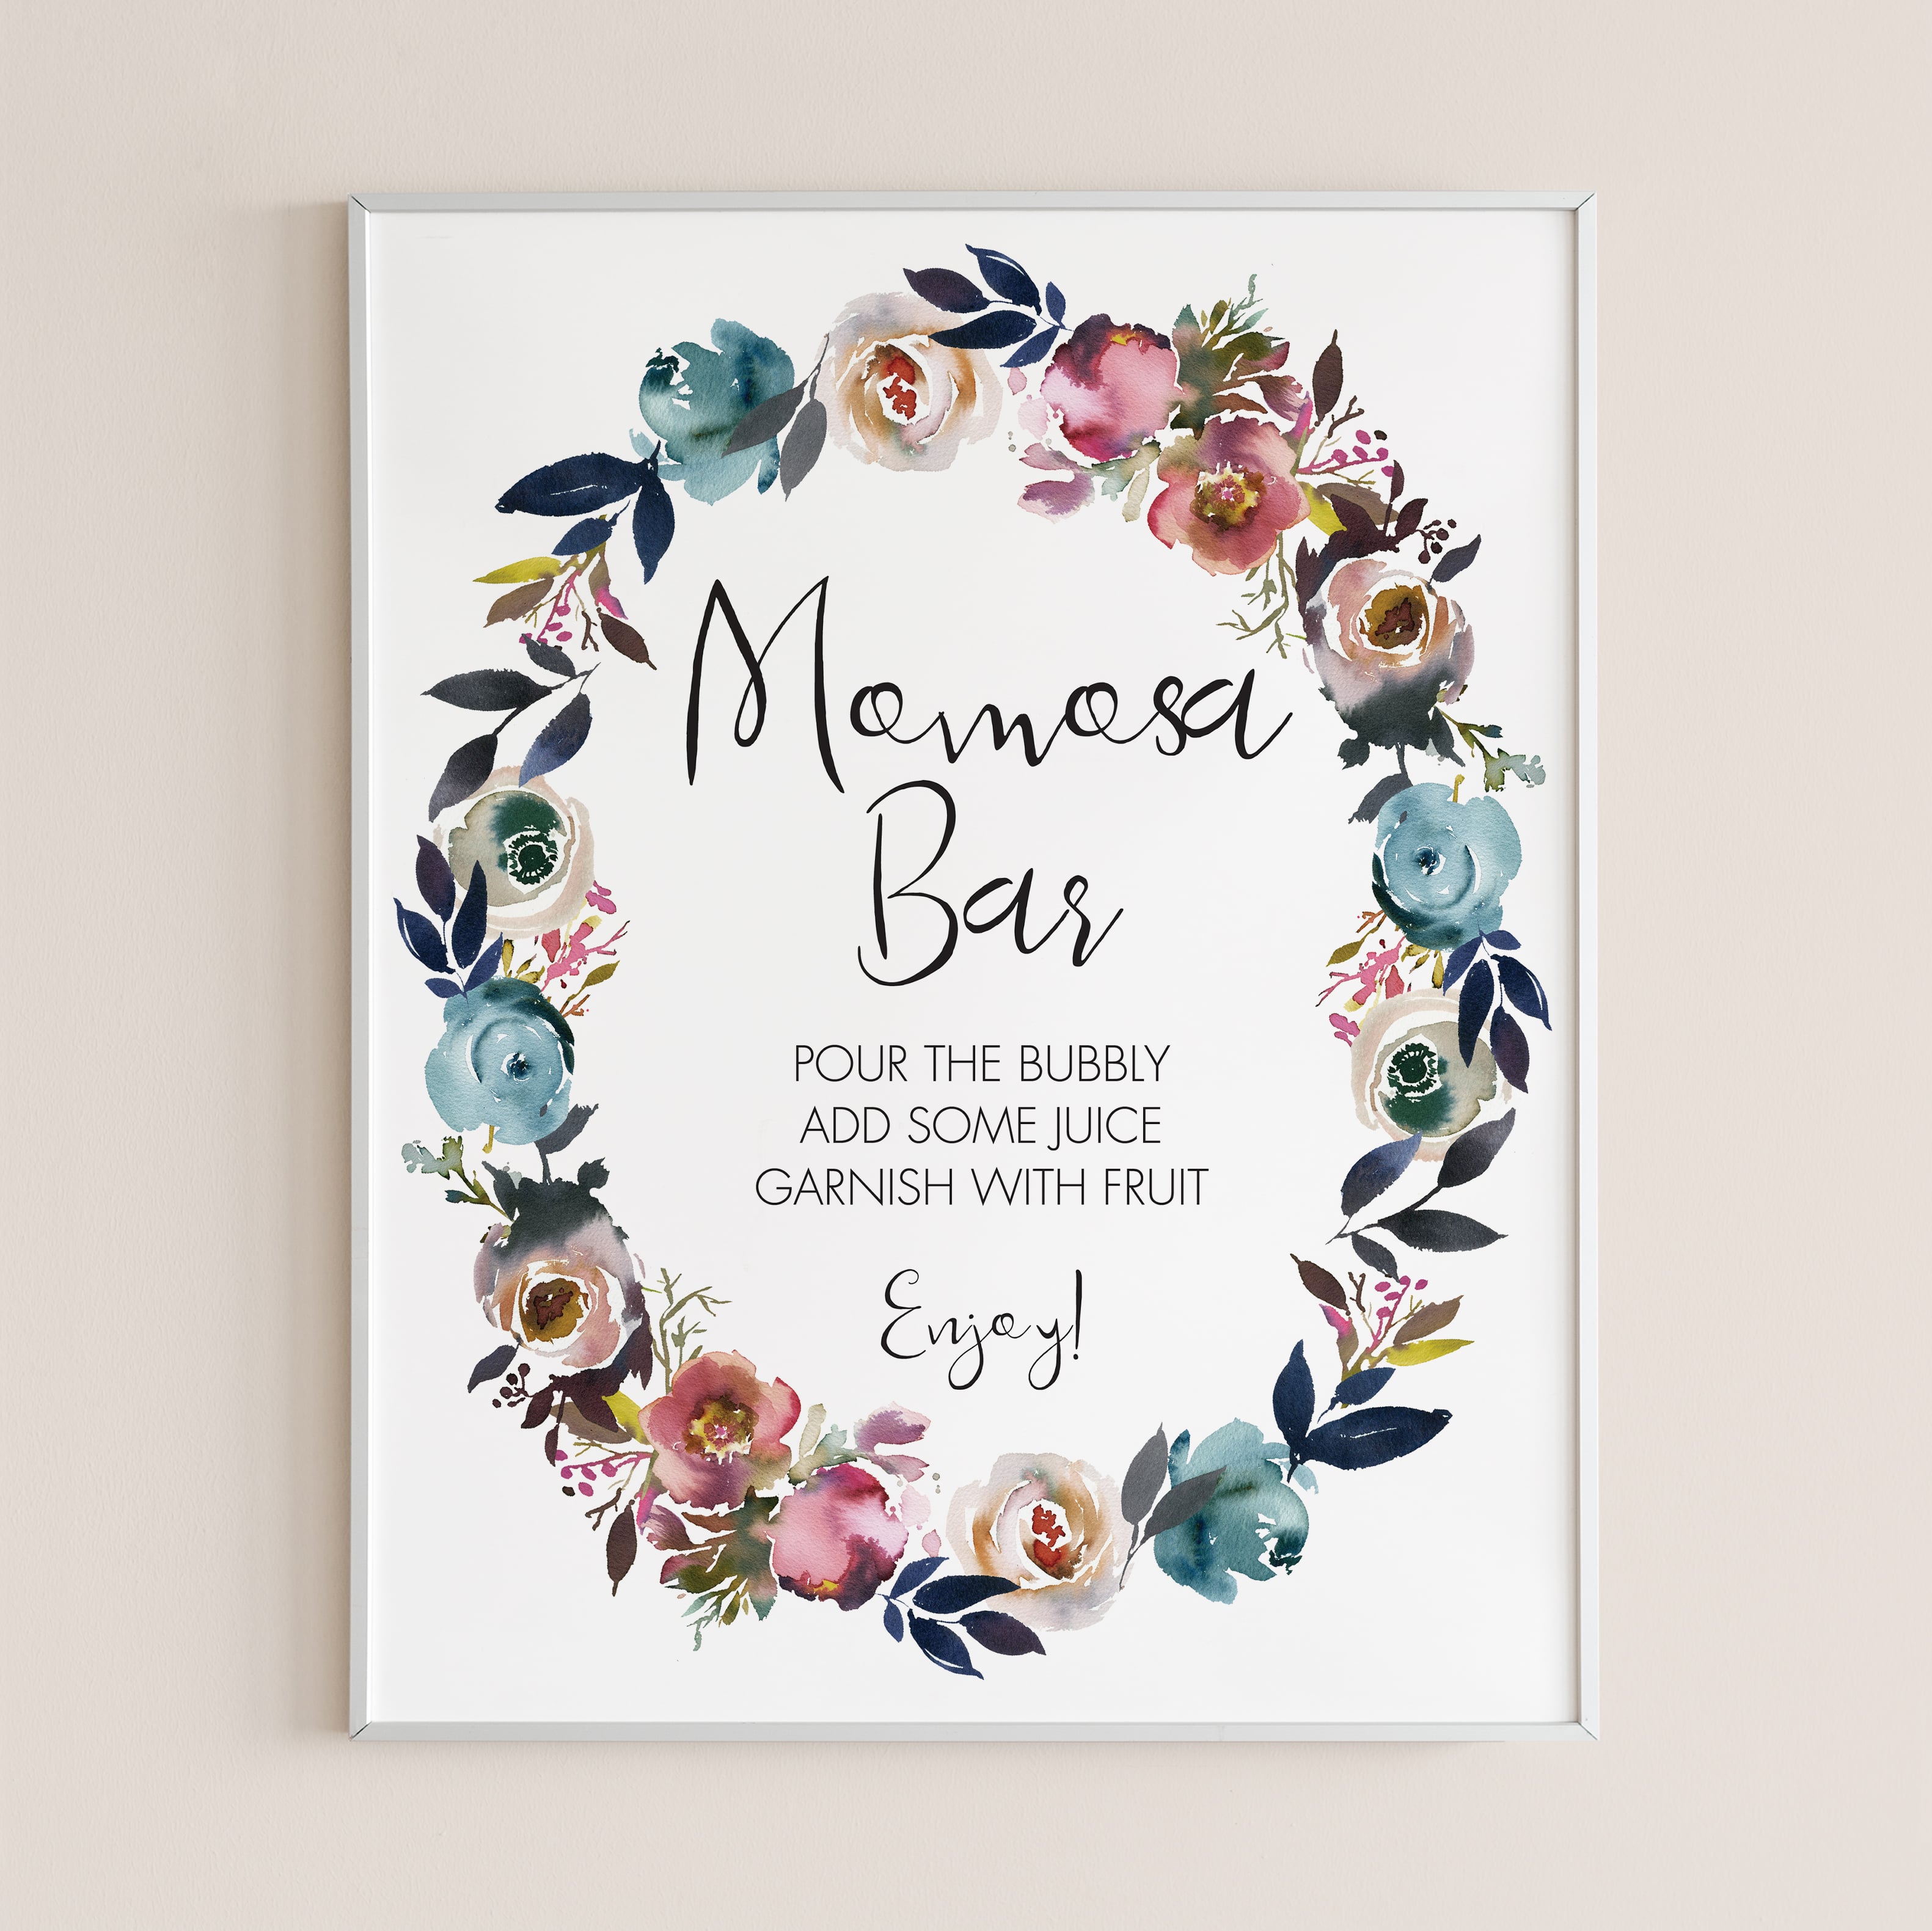 Baby shower bubbly bar sign printable flowers by LittleSizzle